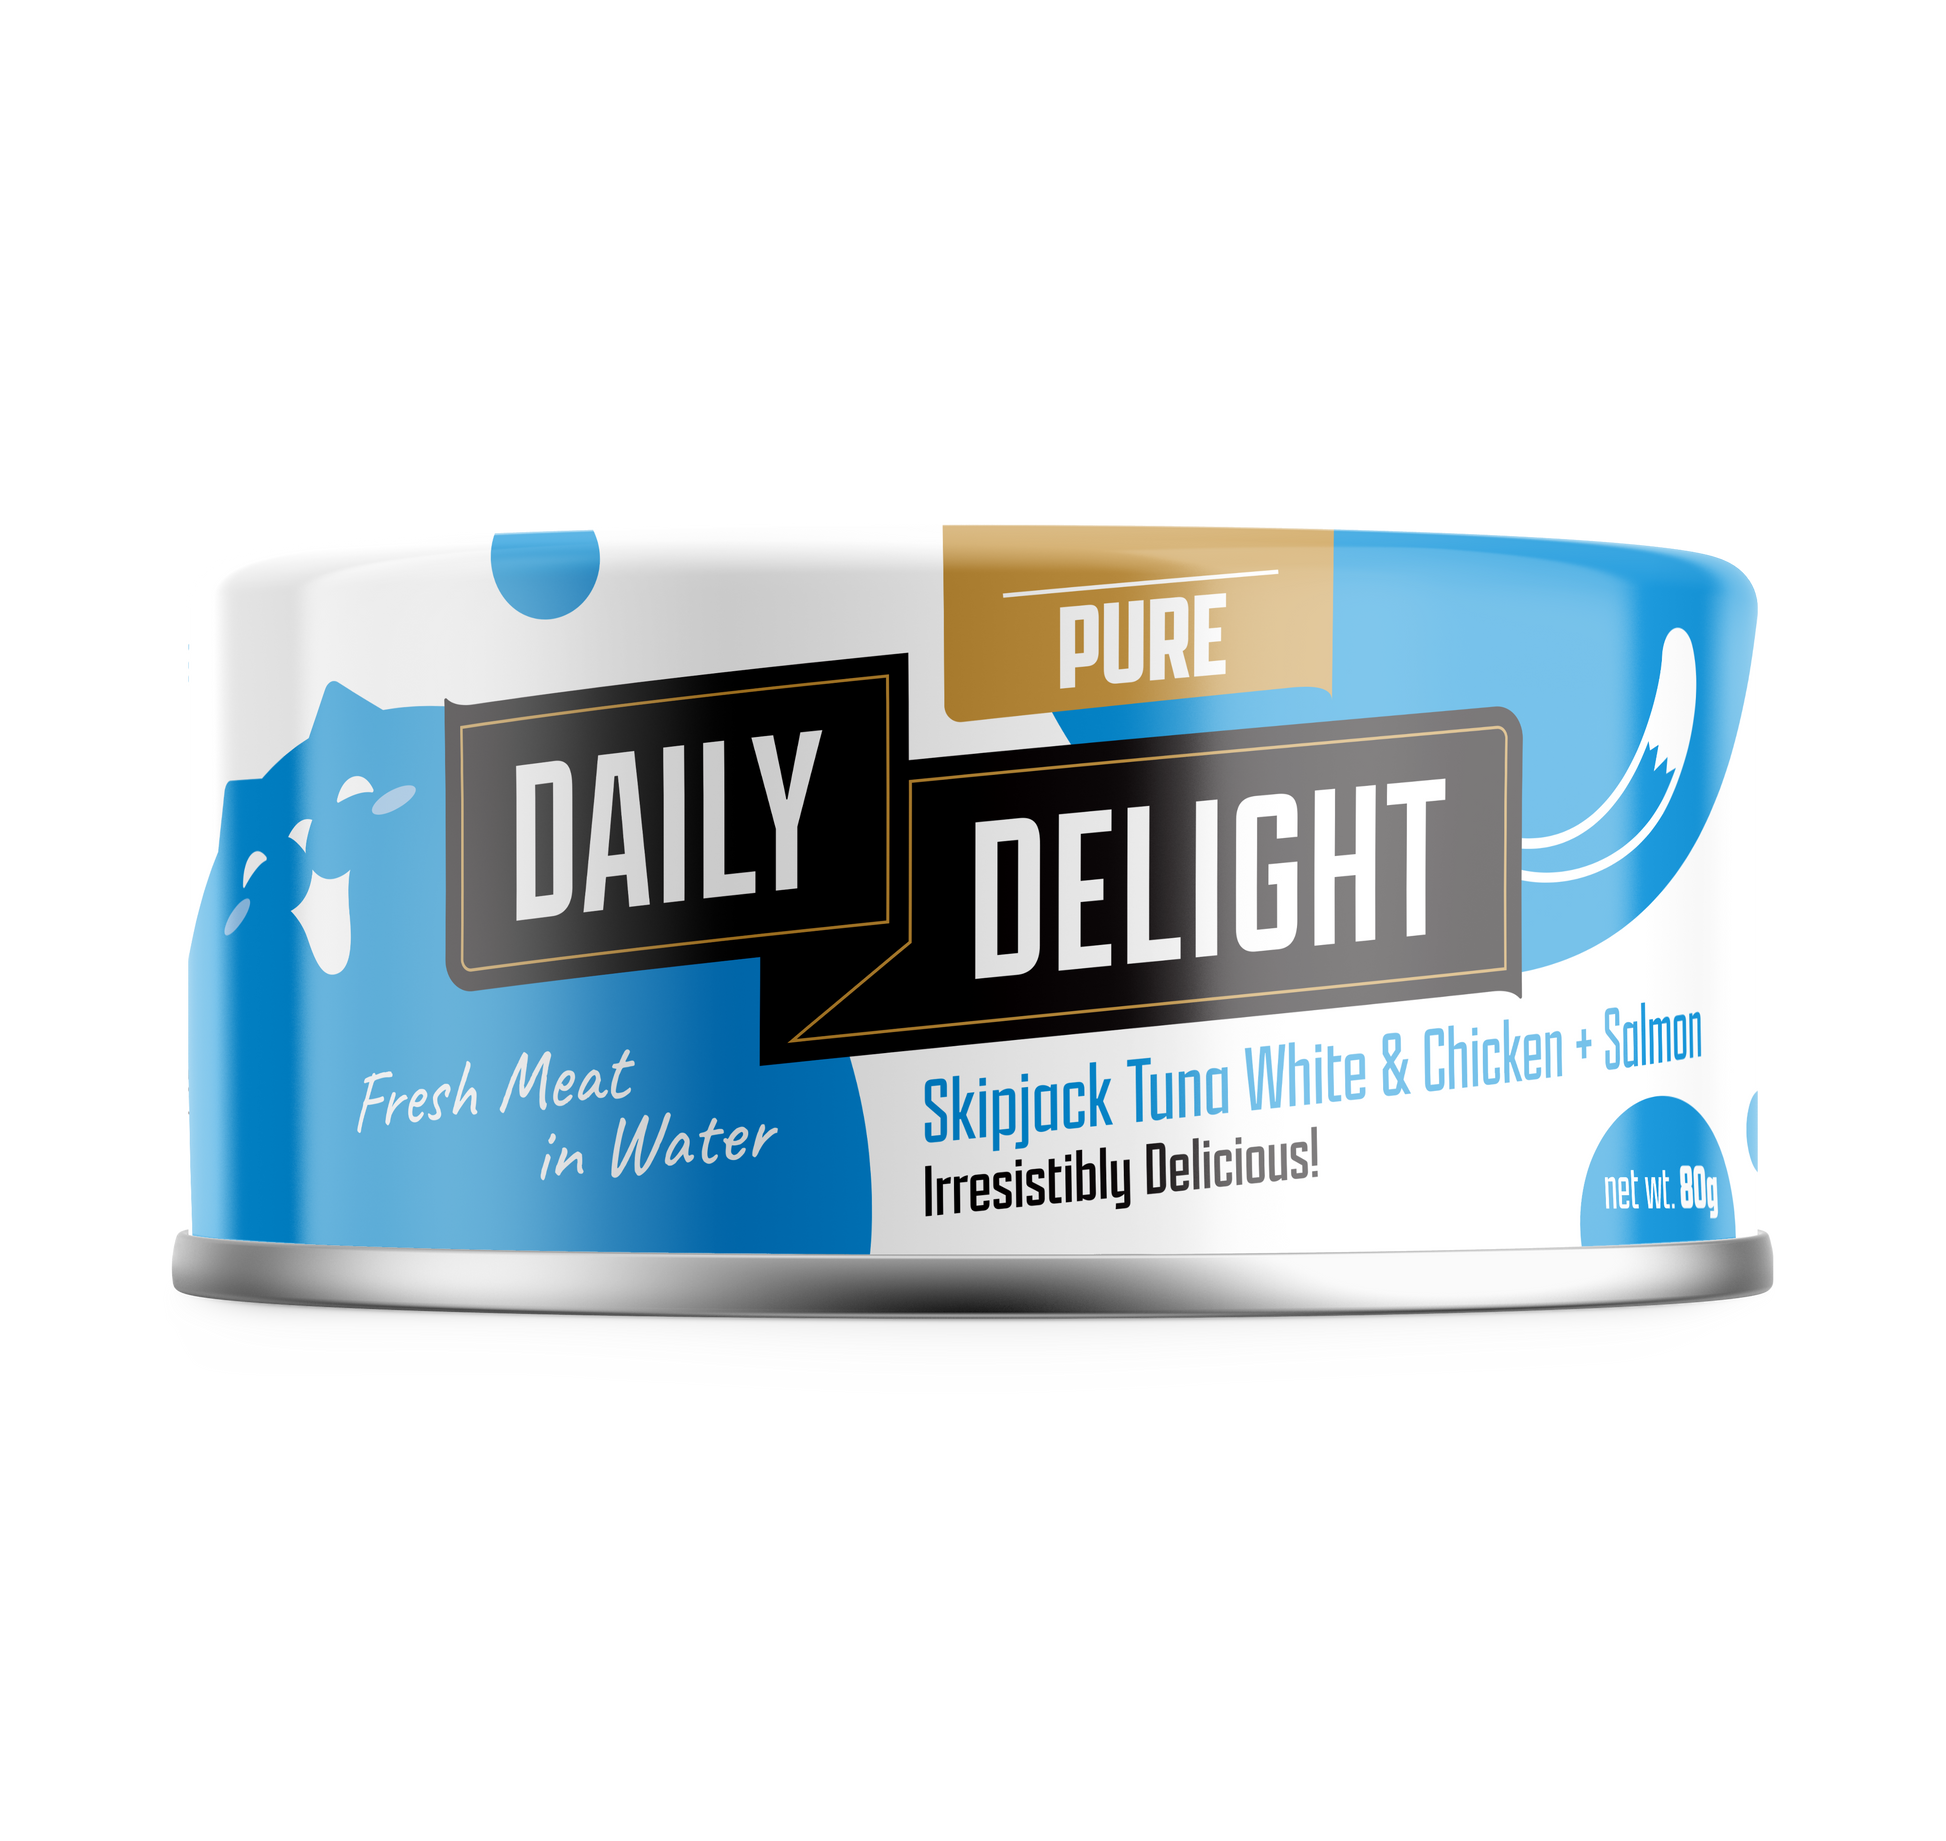 Daily Delight Pure Skipjack Tuna White & Chicken with Salmon 80g Carton (24 Cans)-Daily Delight-Catsmart-express